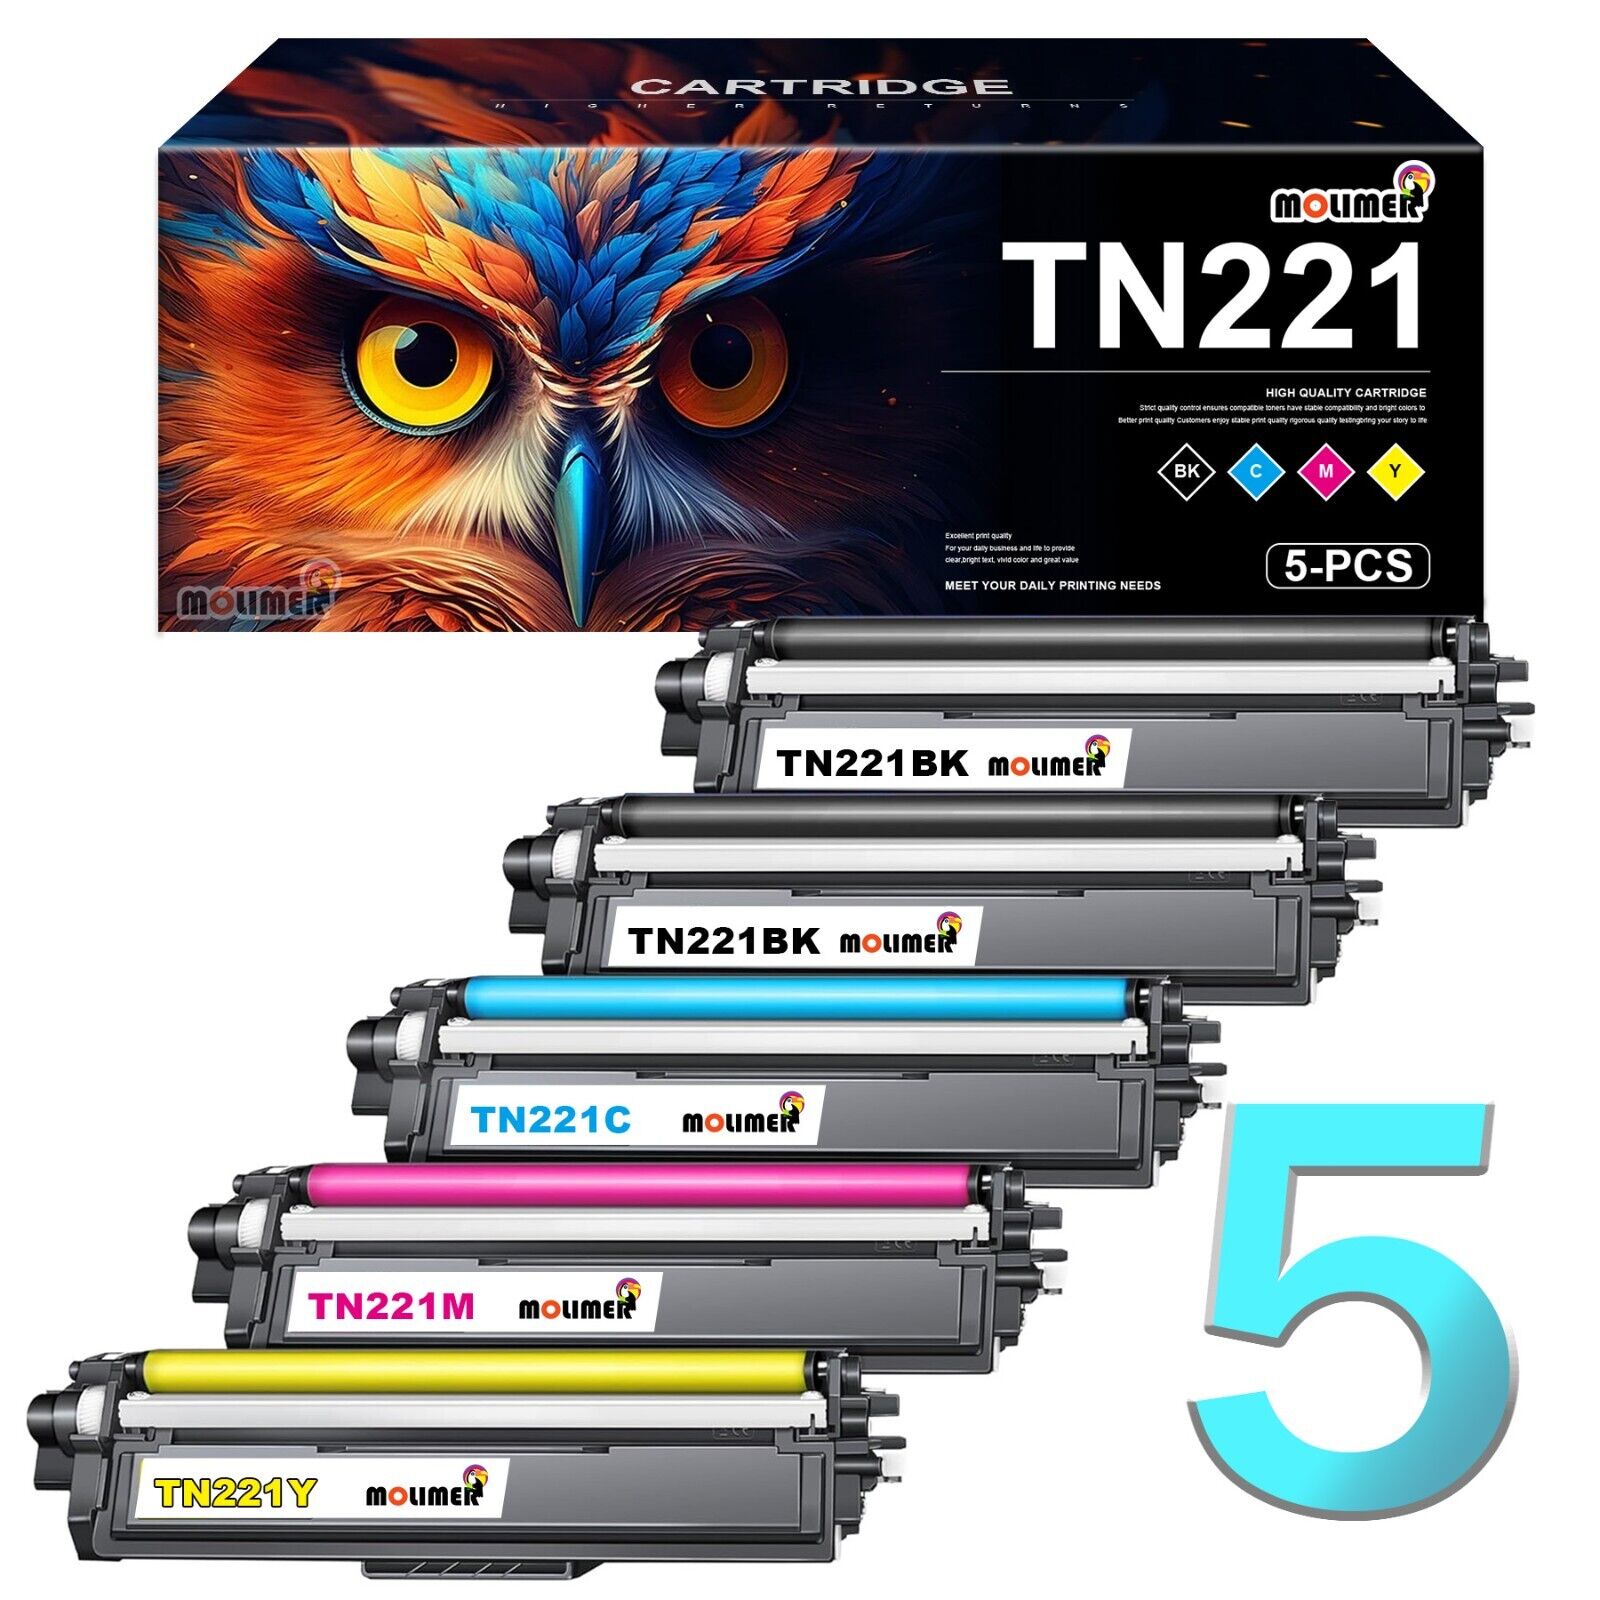 TN221 Toner Cartridge Replacement for Brother HL-3140CW HL-3170CDW 3180CDW 5 PK